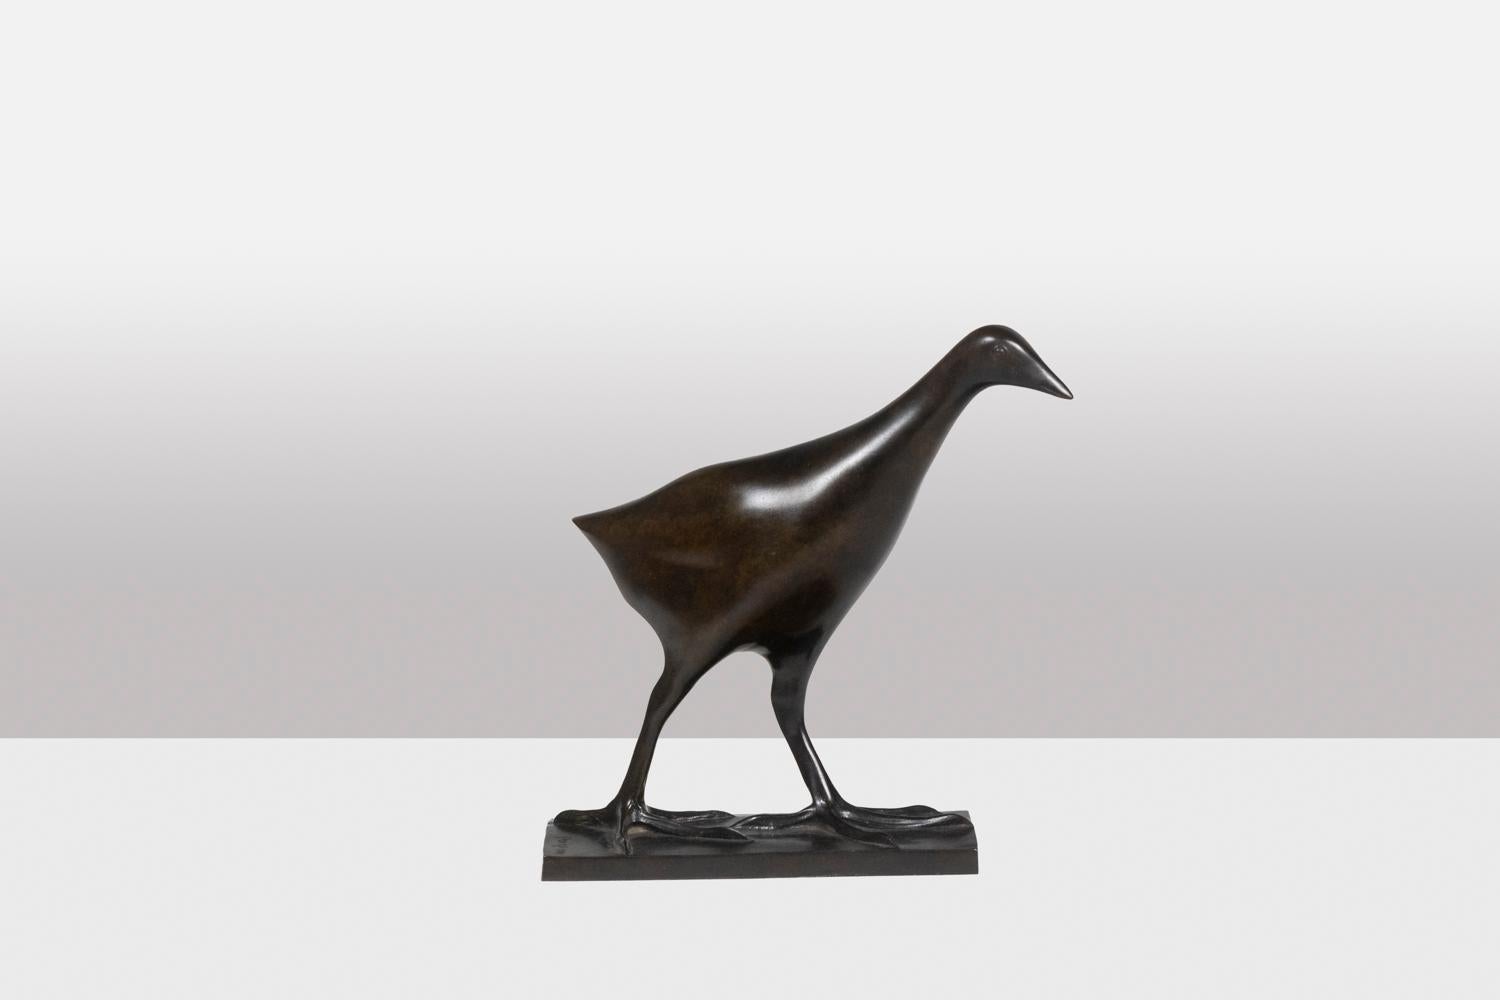 François Pompon.
Foundry Valsuani, edited by.

Sculpture entitled “Moorhen”. Bronze with brown patina, lost wax casting.

Stamp of the Foundry “cire perdeue C. Valsuani” on the terrace. Reproduction dated 2006. Numbered 9/25.
Reference: LS59753240B